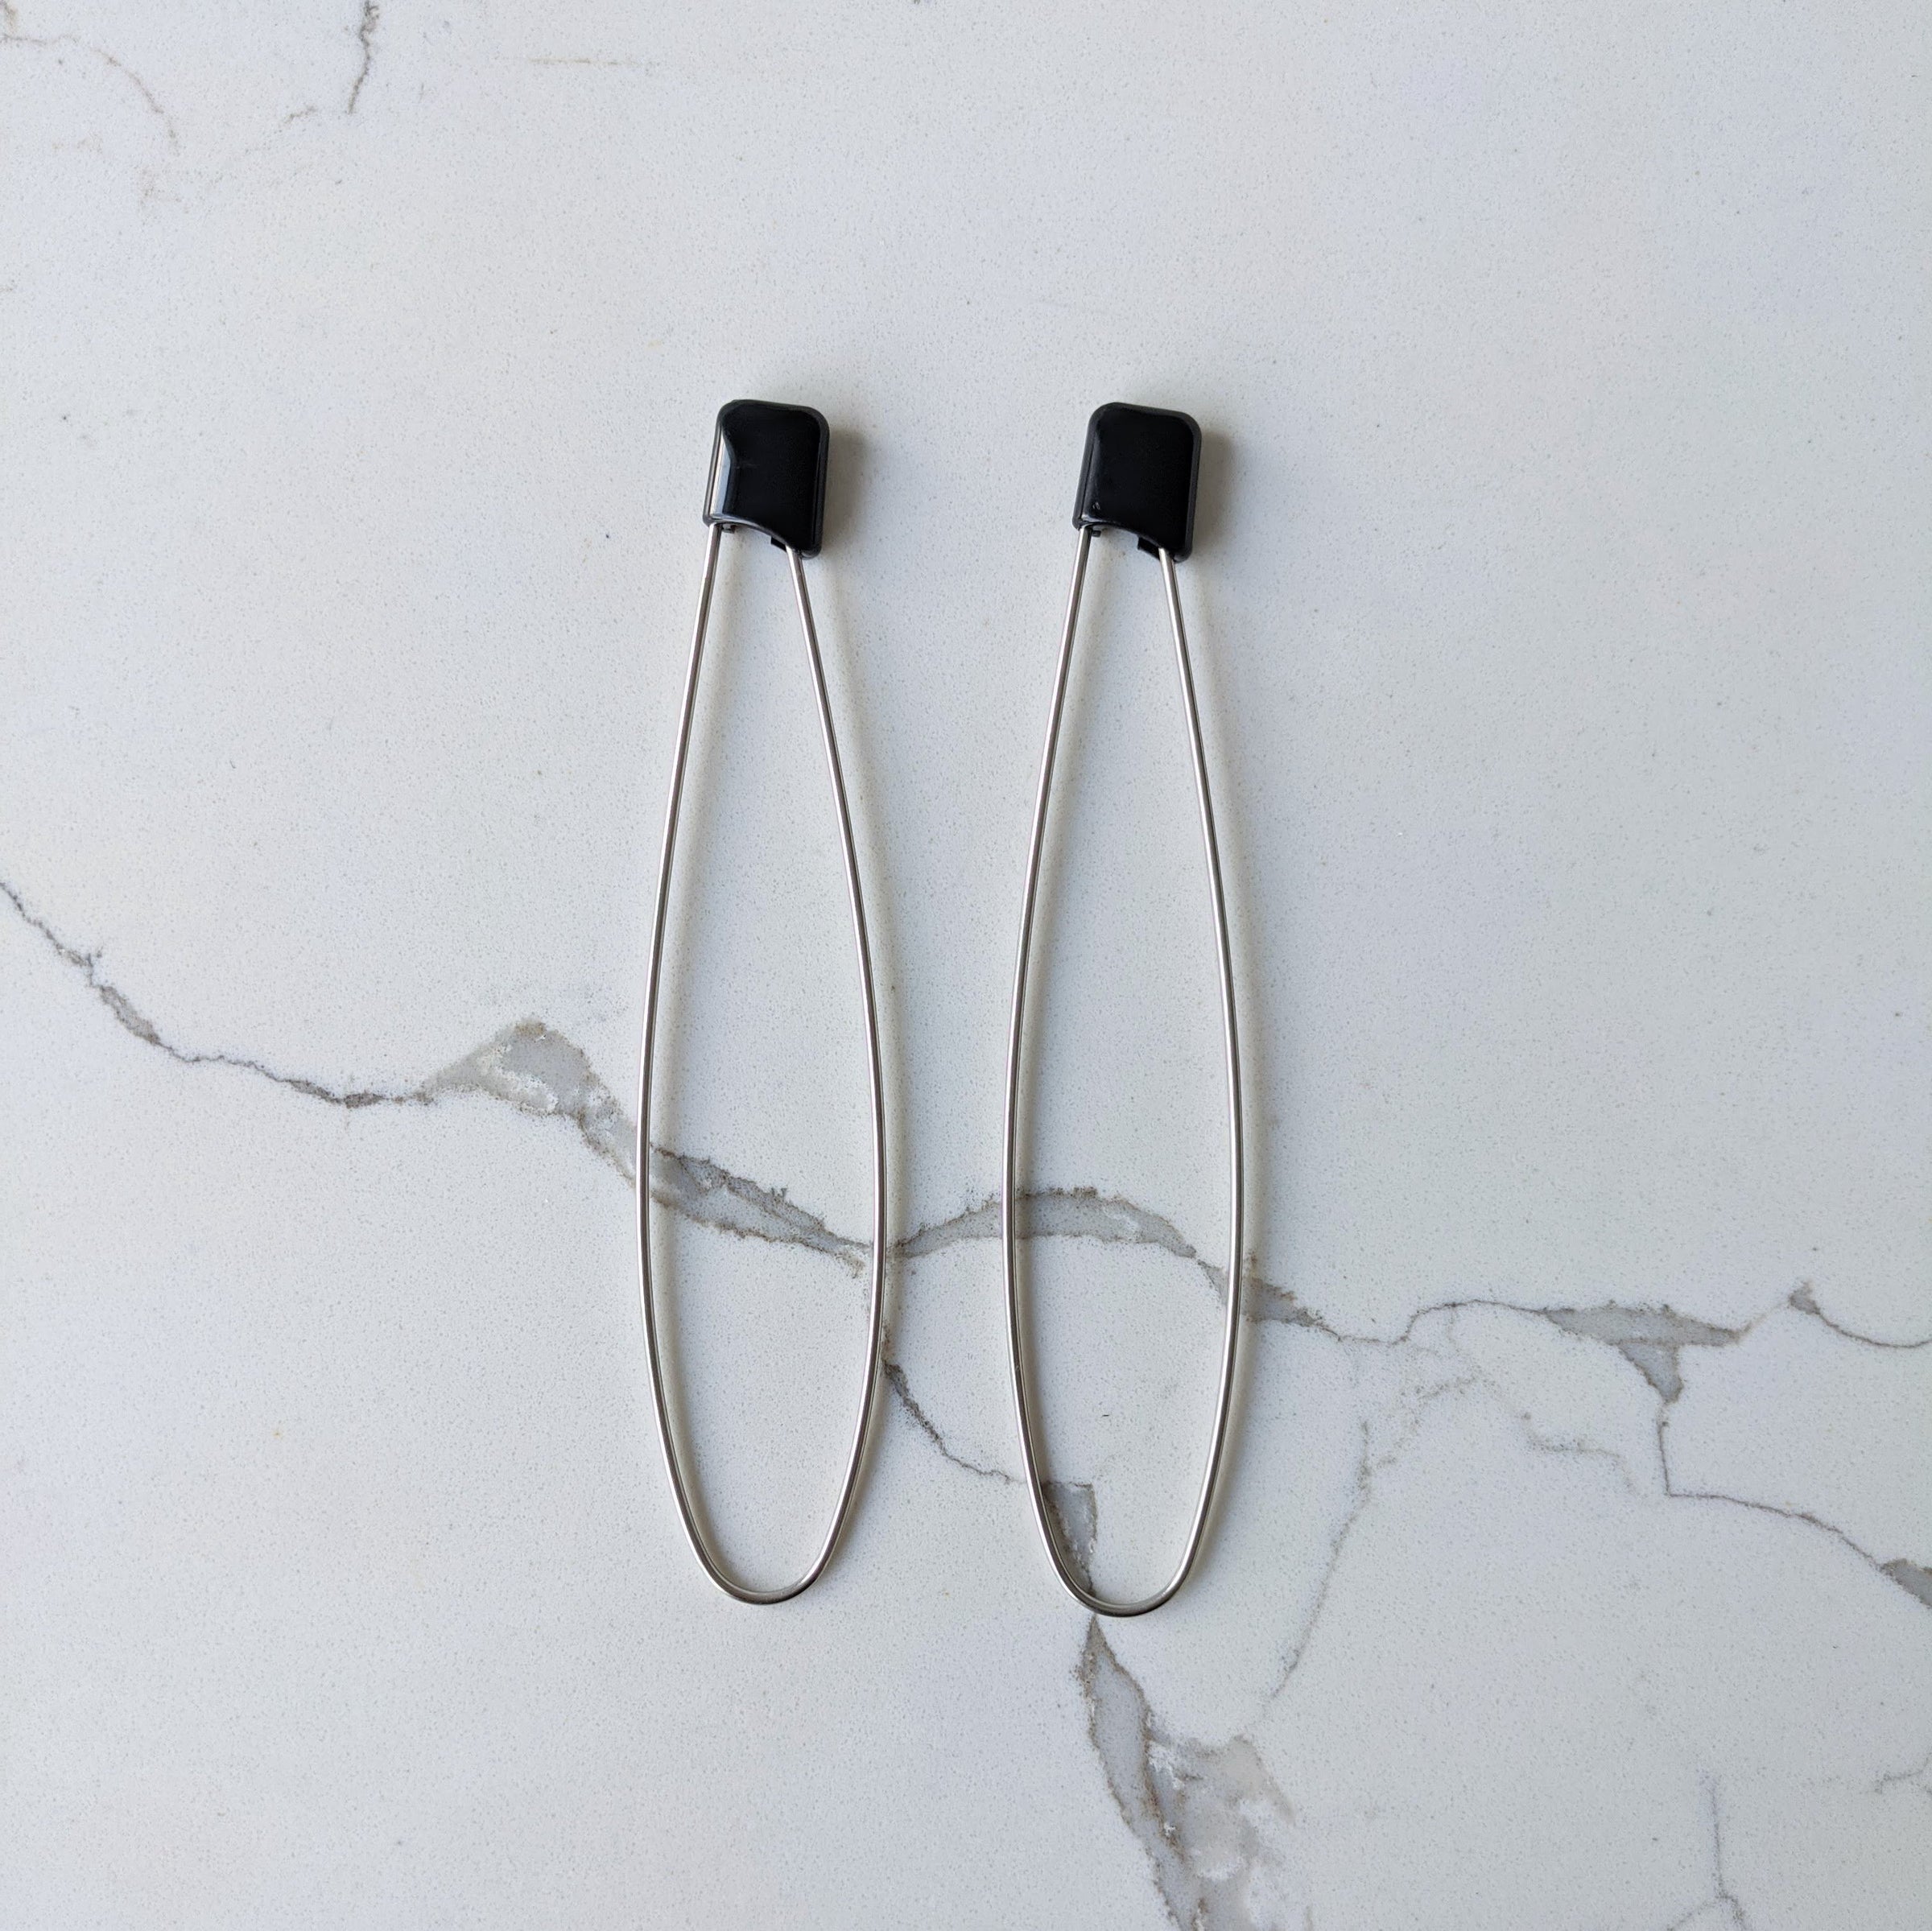 Buy Hand Crafted Fine Silver Cable Needle Stitch Holder Set